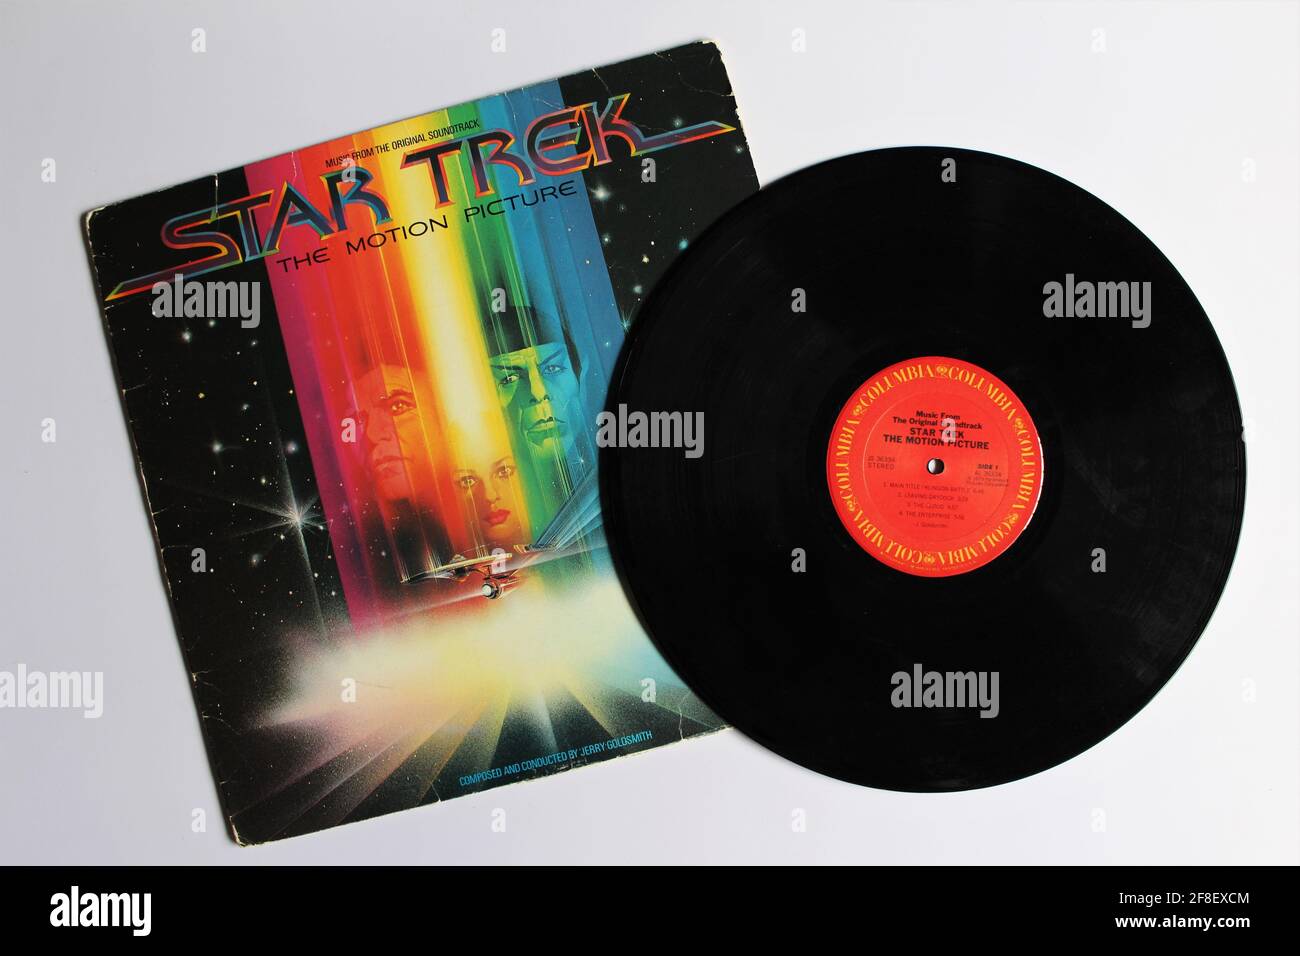 Star Trek: The Motion Picture is an American science fiction film directed by Robert Wise based on the television series. Soundtrack music album vinyl Stock Photo